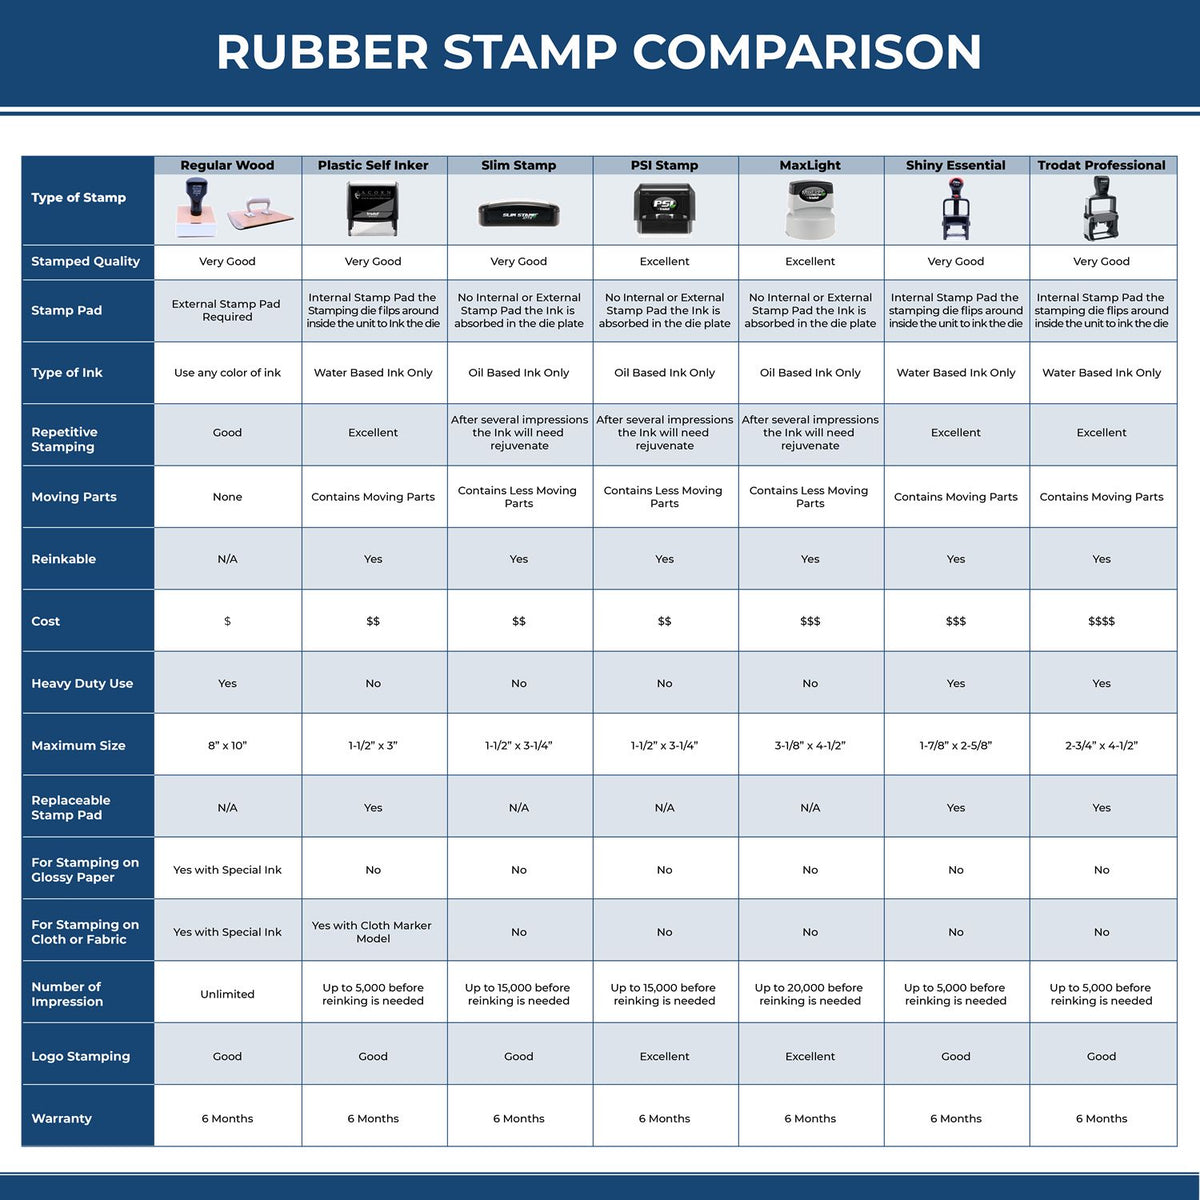 Large Priority Mail International Rubber Stamp 4958R Rubber Stamp Comparison